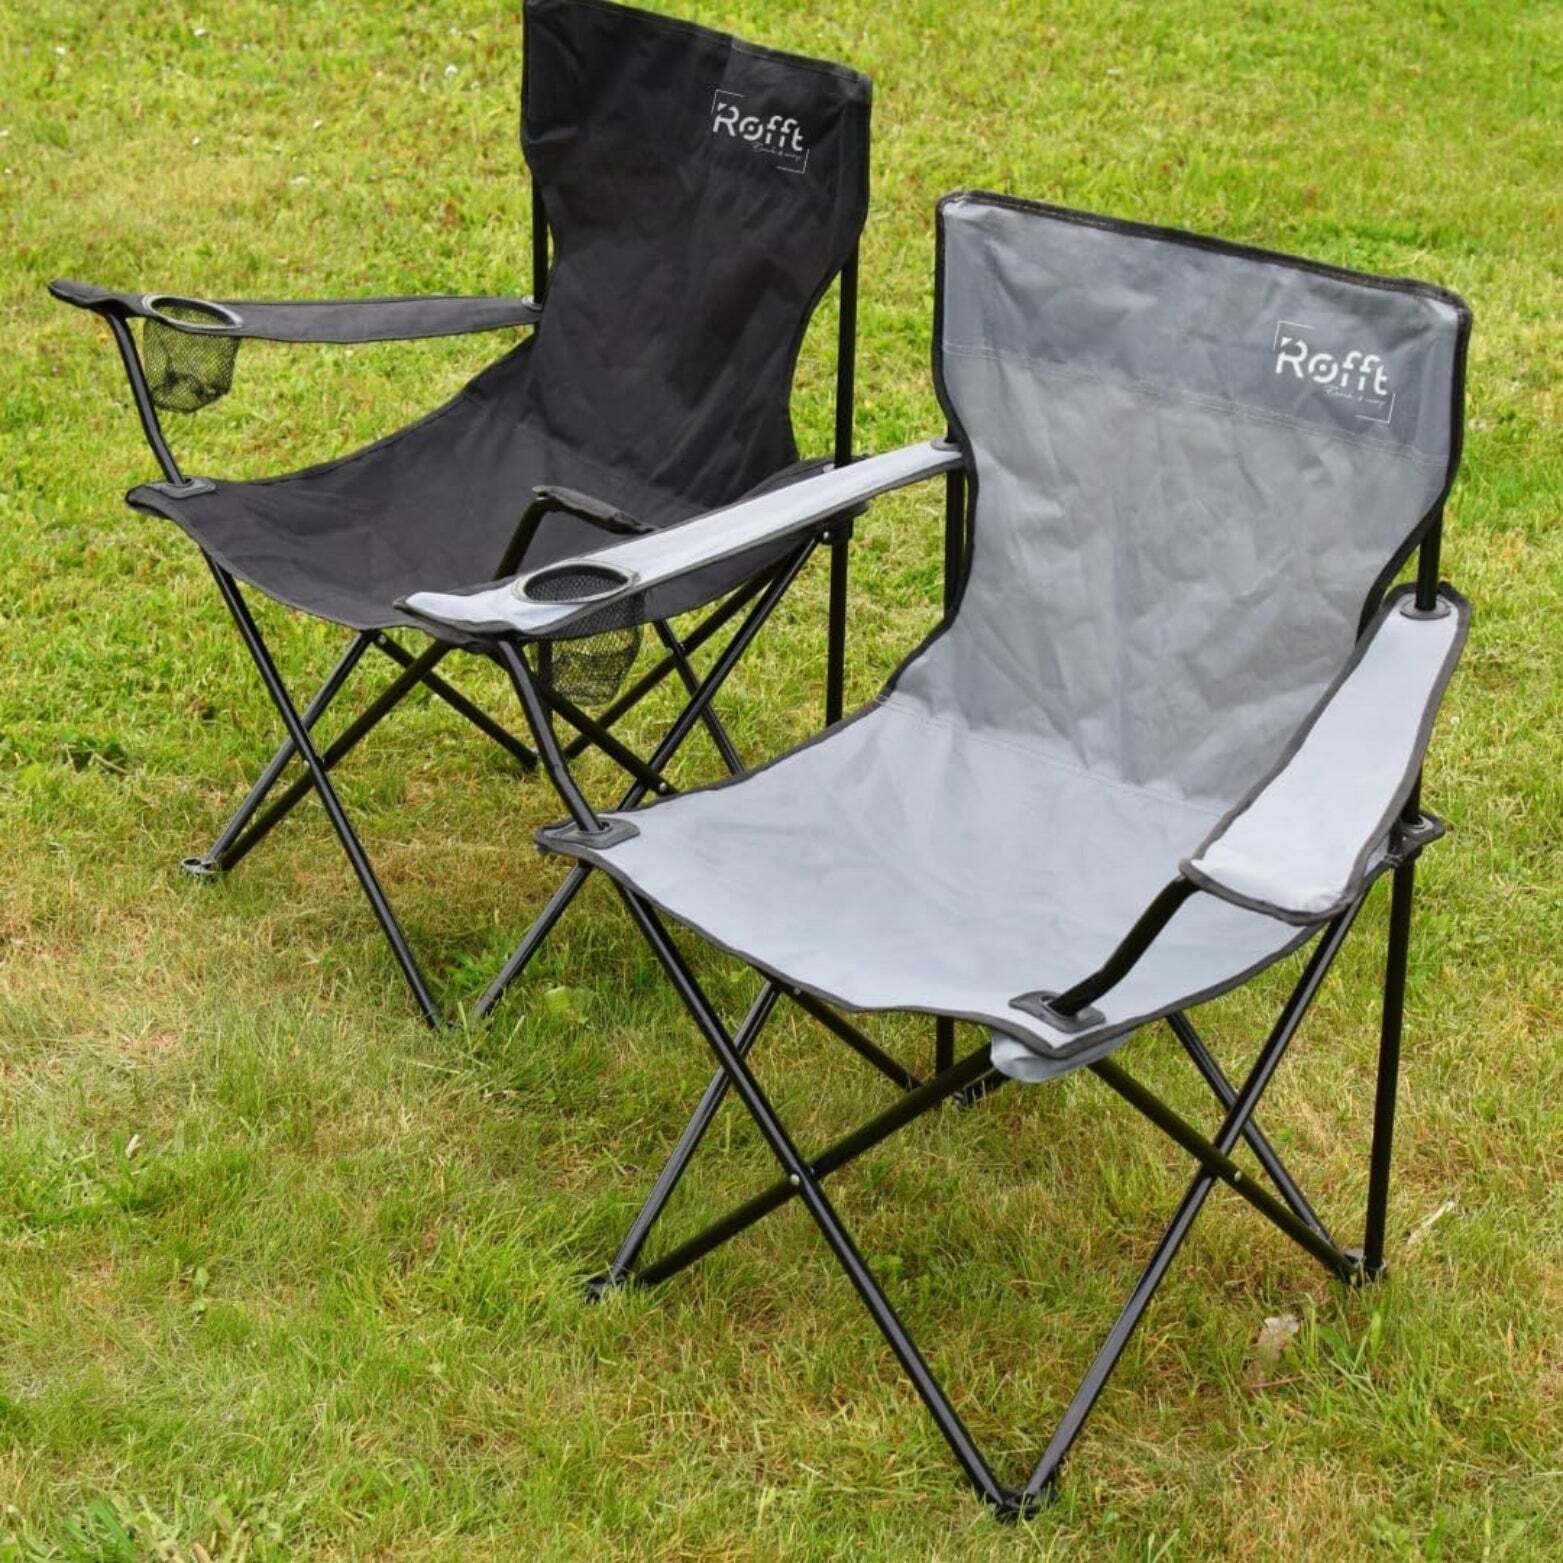 ROFFT Portable Camping Chair - Cooler Pocket, Cup Holder, Alloy Steel Frame - Black